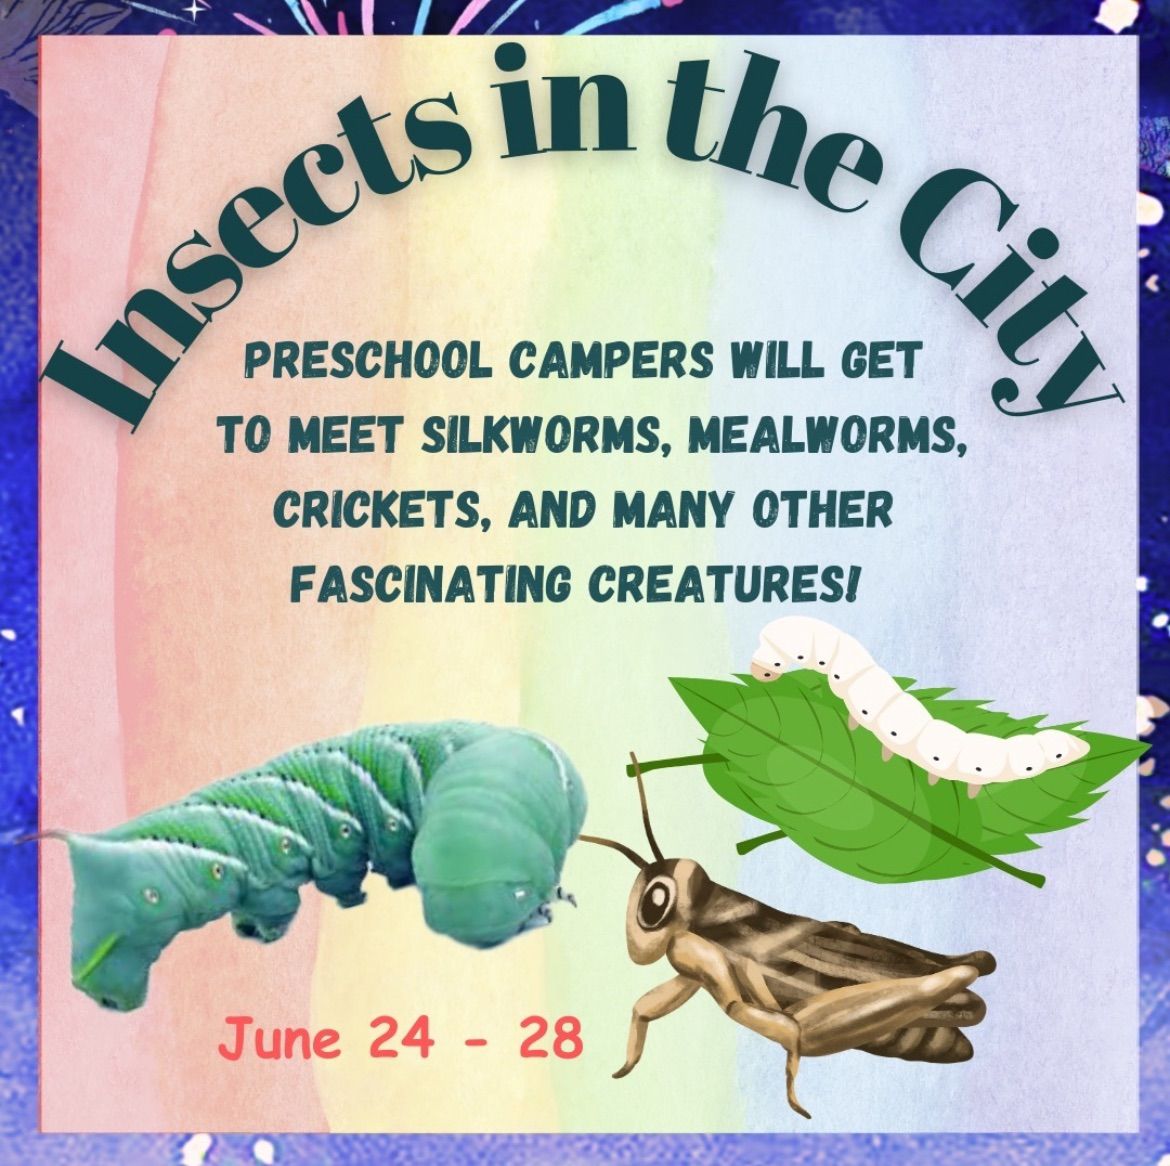 Summer Camps: Insects in the City